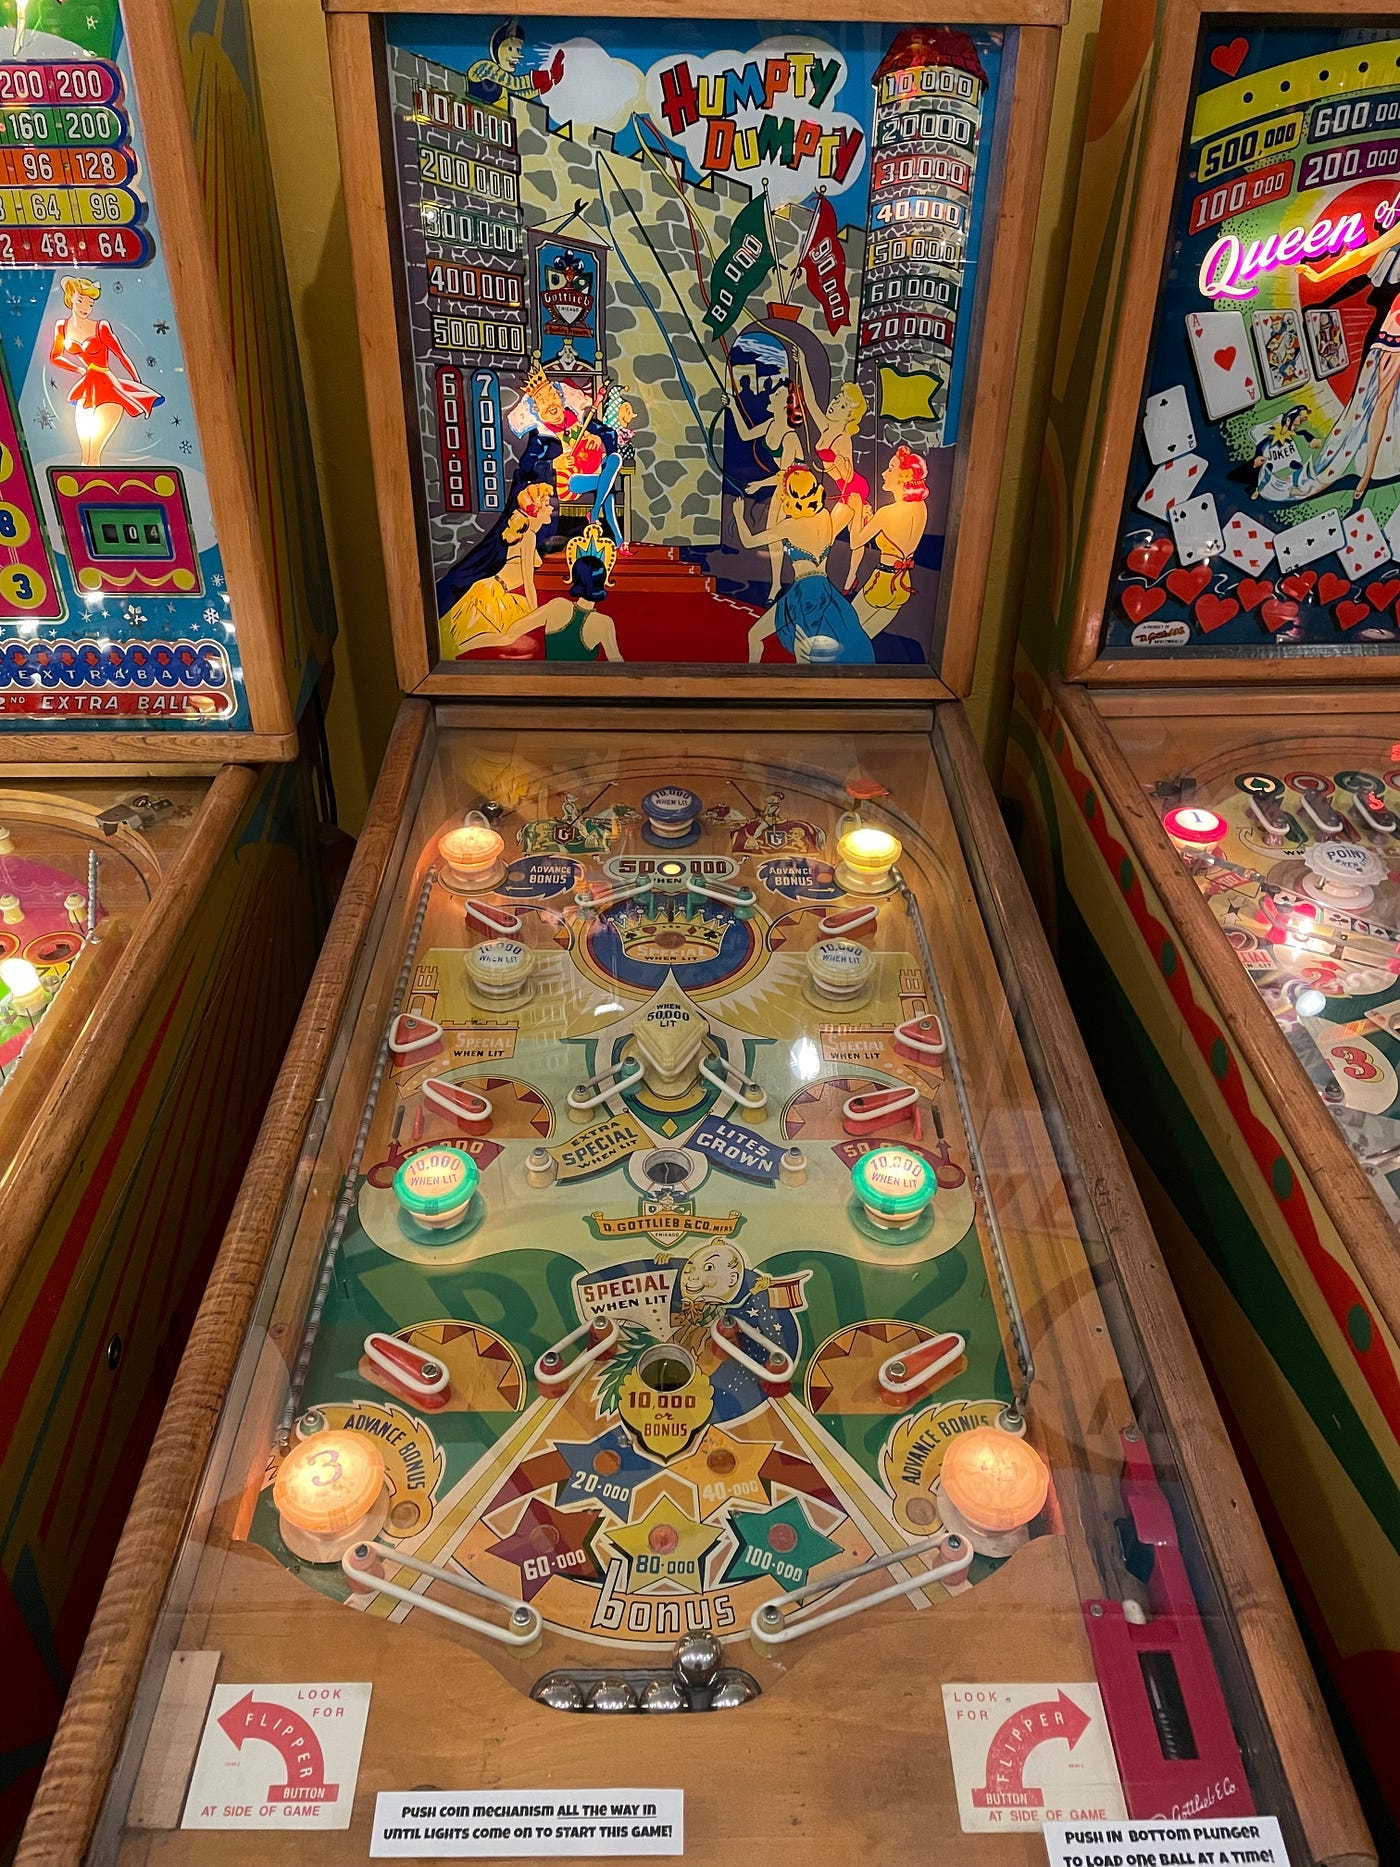 At Pacific Pinball Museum, nostalgia is king